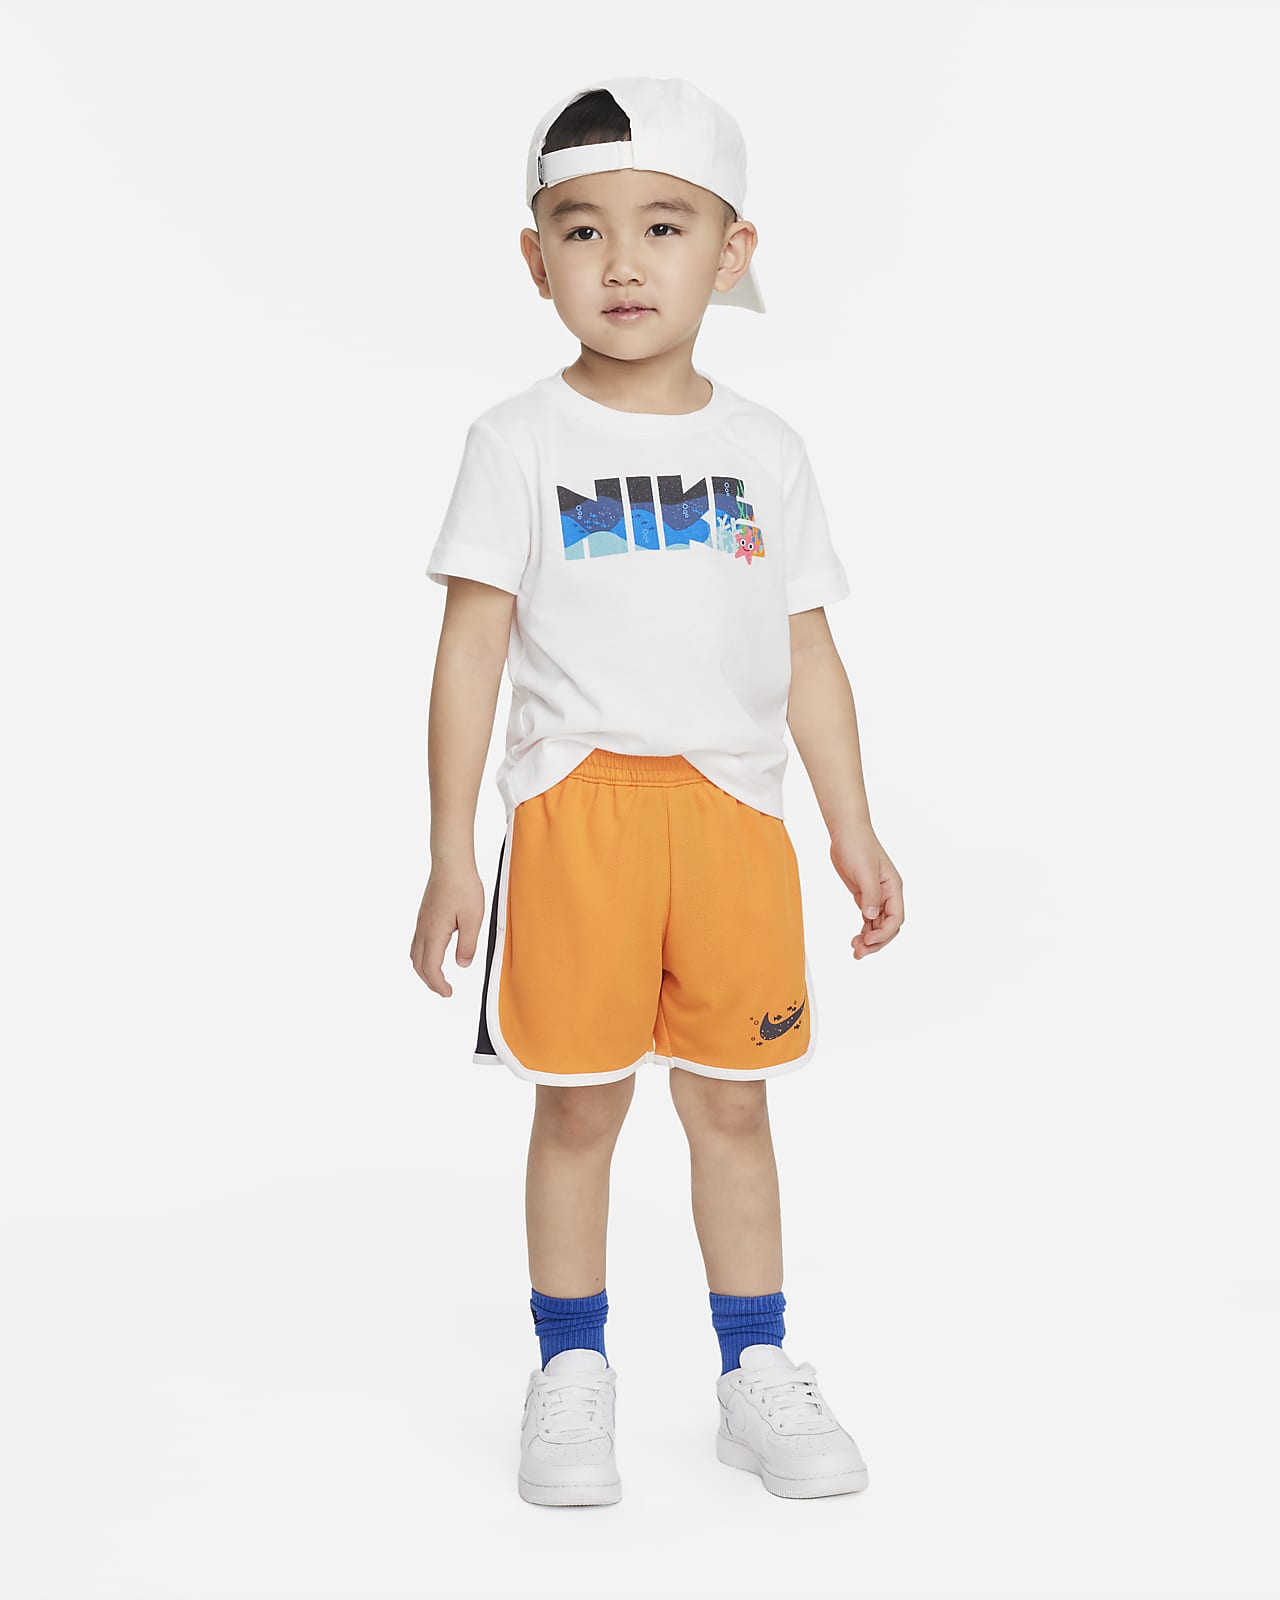 Nike Kid's Sportswear T Shirt And Shorts Outfit